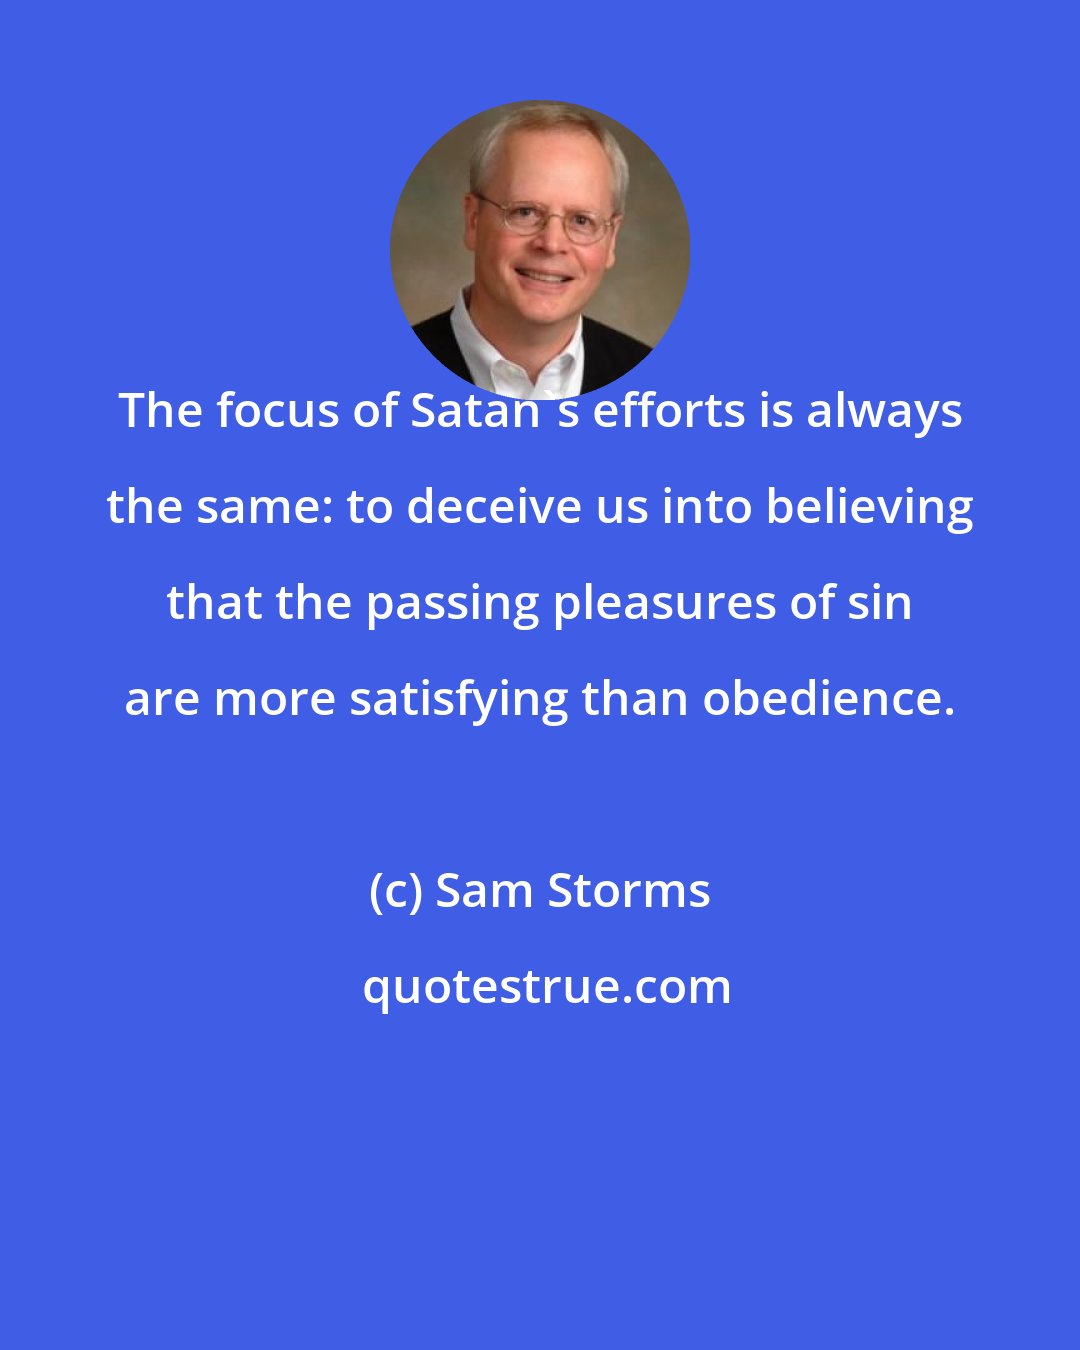 Sam Storms: The focus of Satan's efforts is always the same: to deceive us into believing that the passing pleasures of sin are more satisfying than obedience.